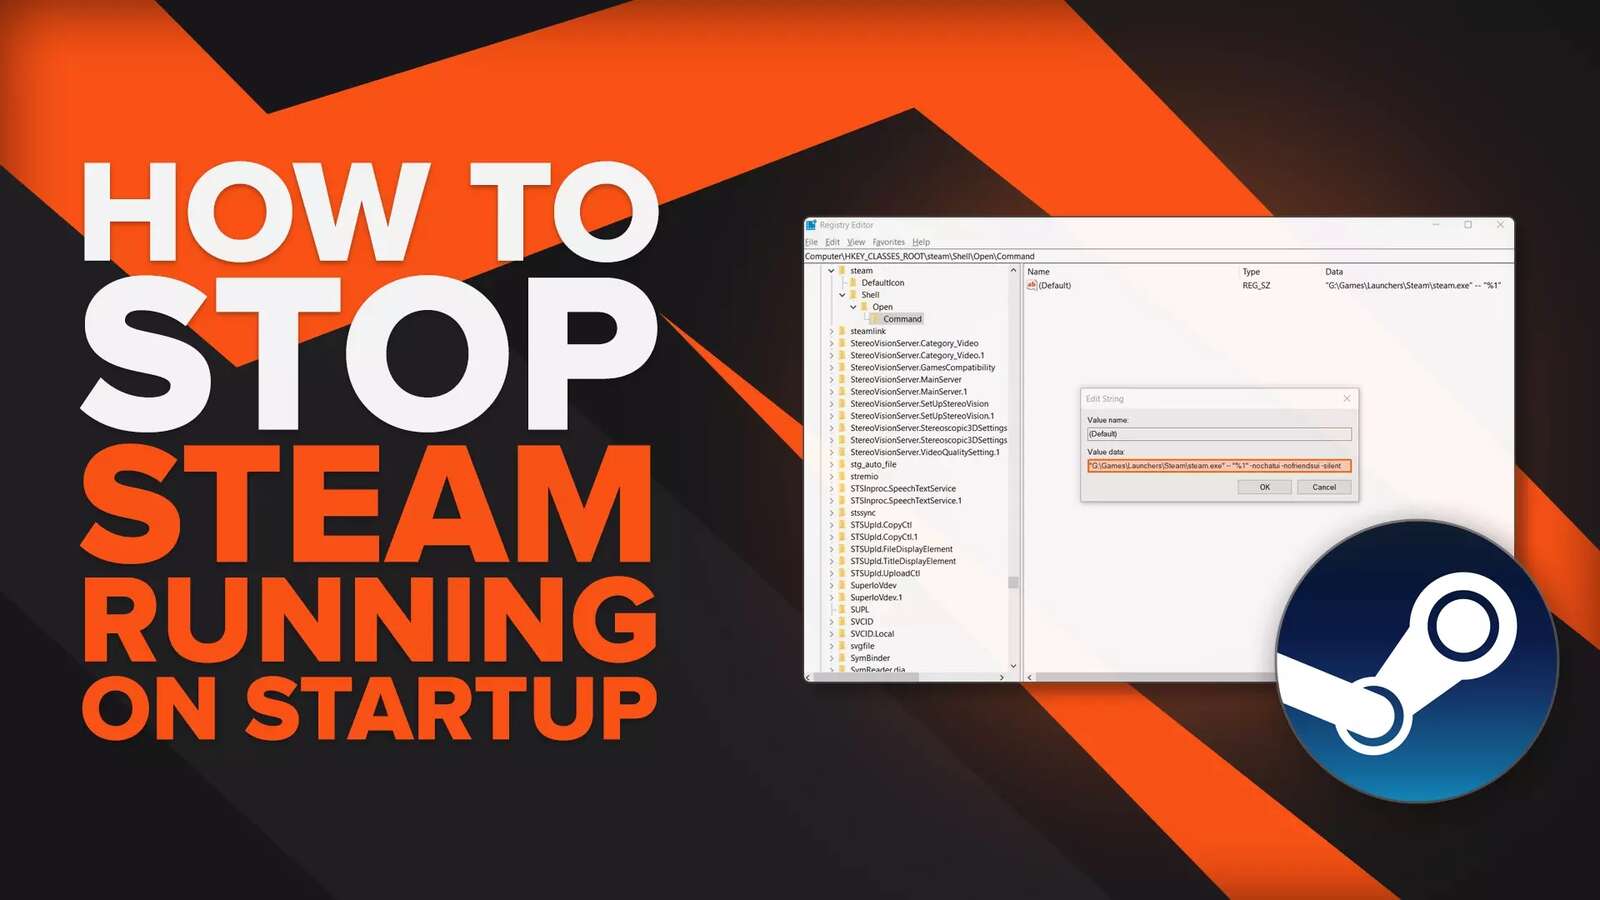 How to Stop Steam from Running Automatically on Startup